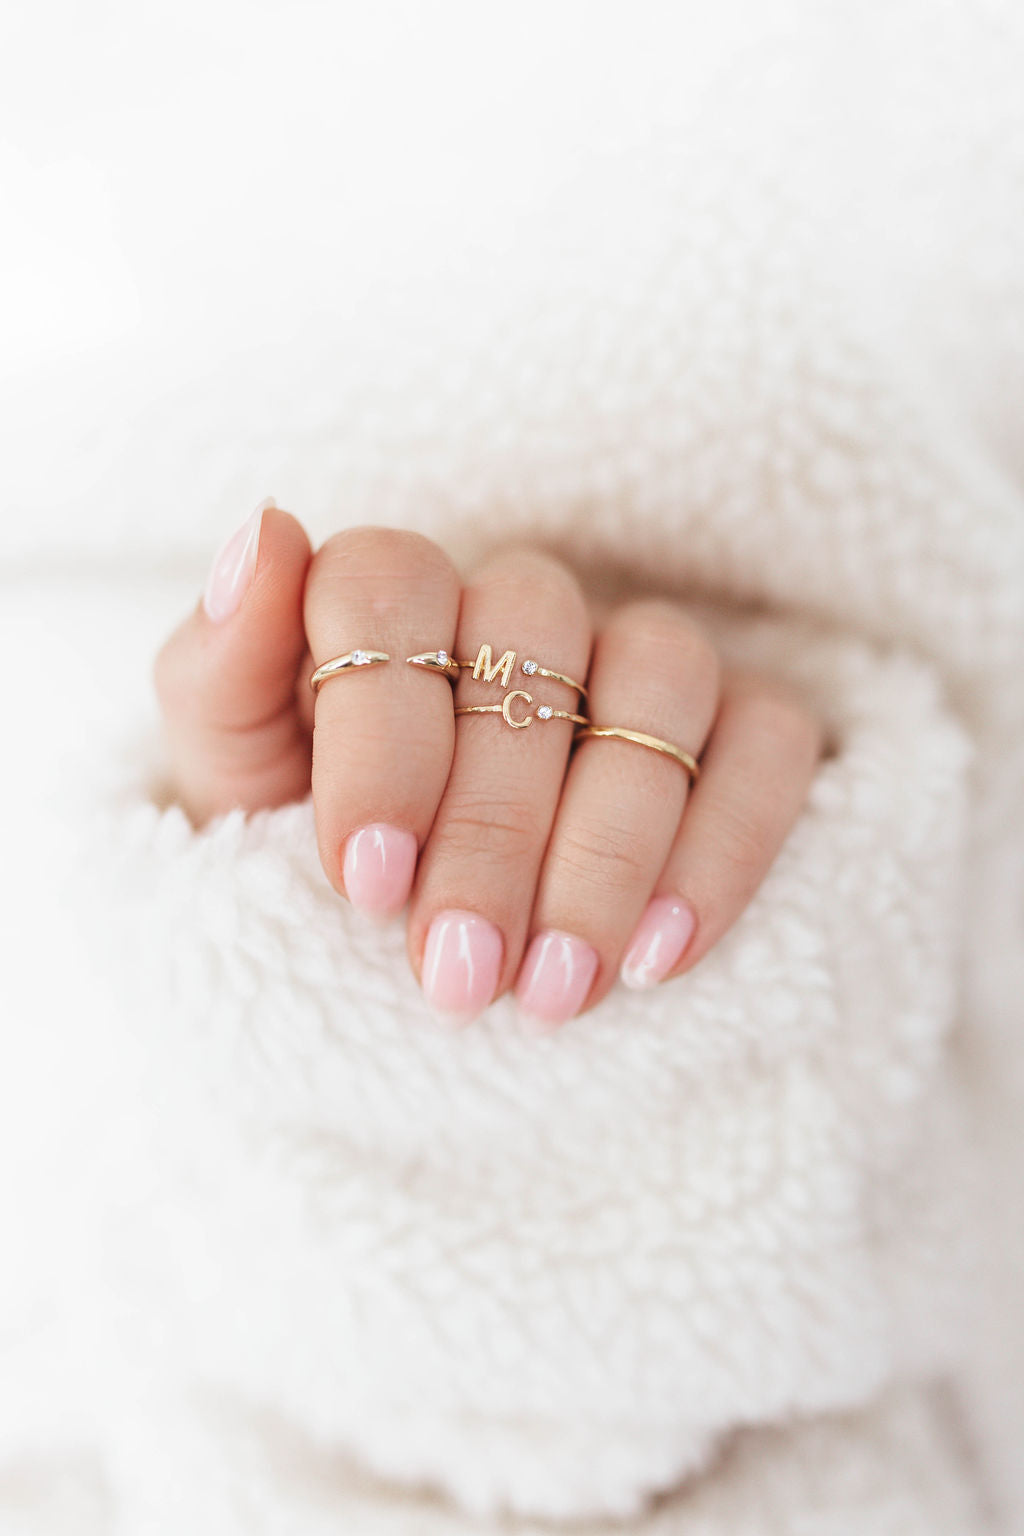 Initial M Ring, Initial C Ring, Katie Dean Jewelry